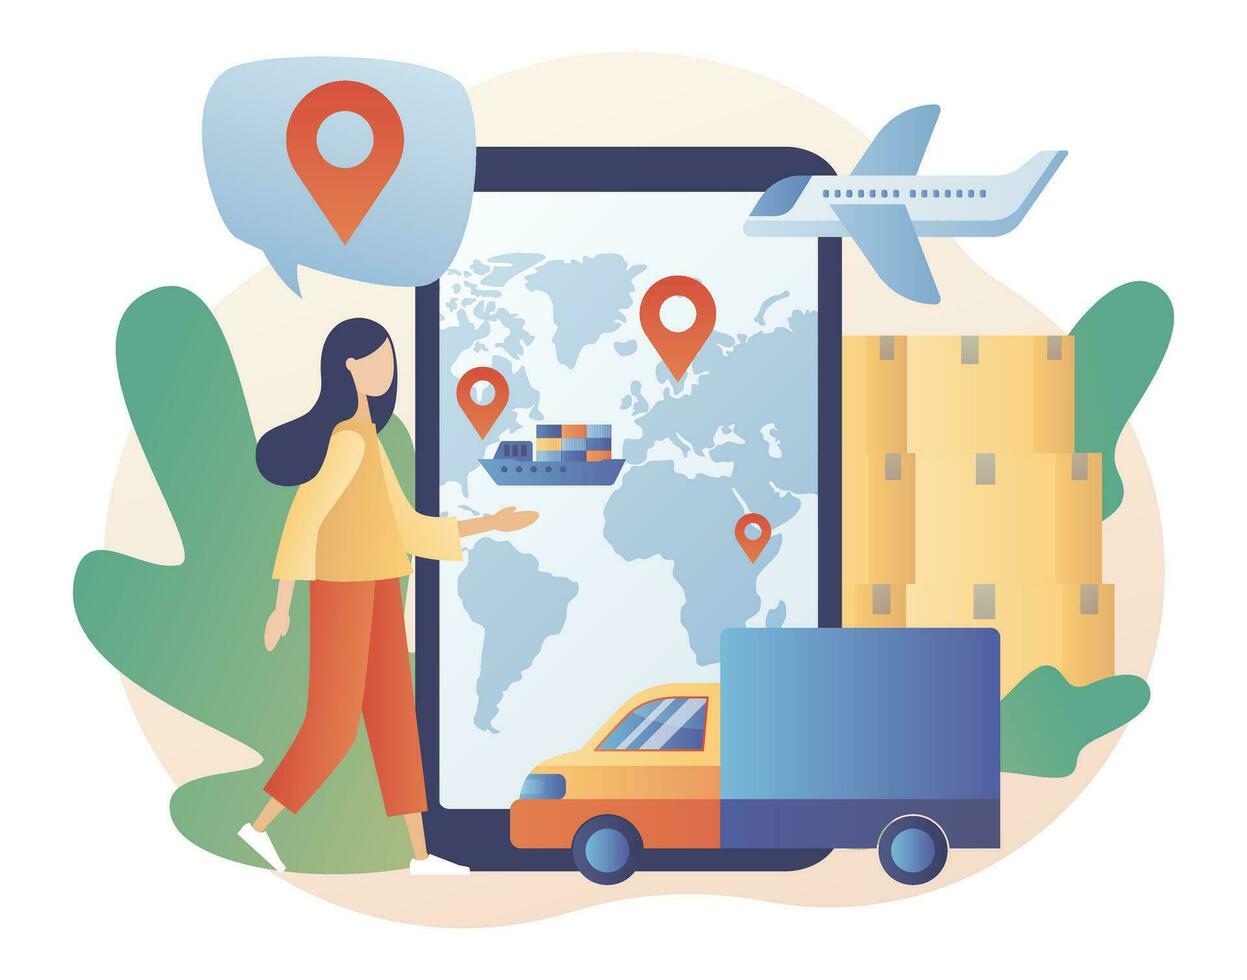 Business logistics. Global logistics network. Export, import, warehouse business, transportation. Tiny woman tracks orders in smartphone app. On-time delivery. Modern flat cartoon style. Vector